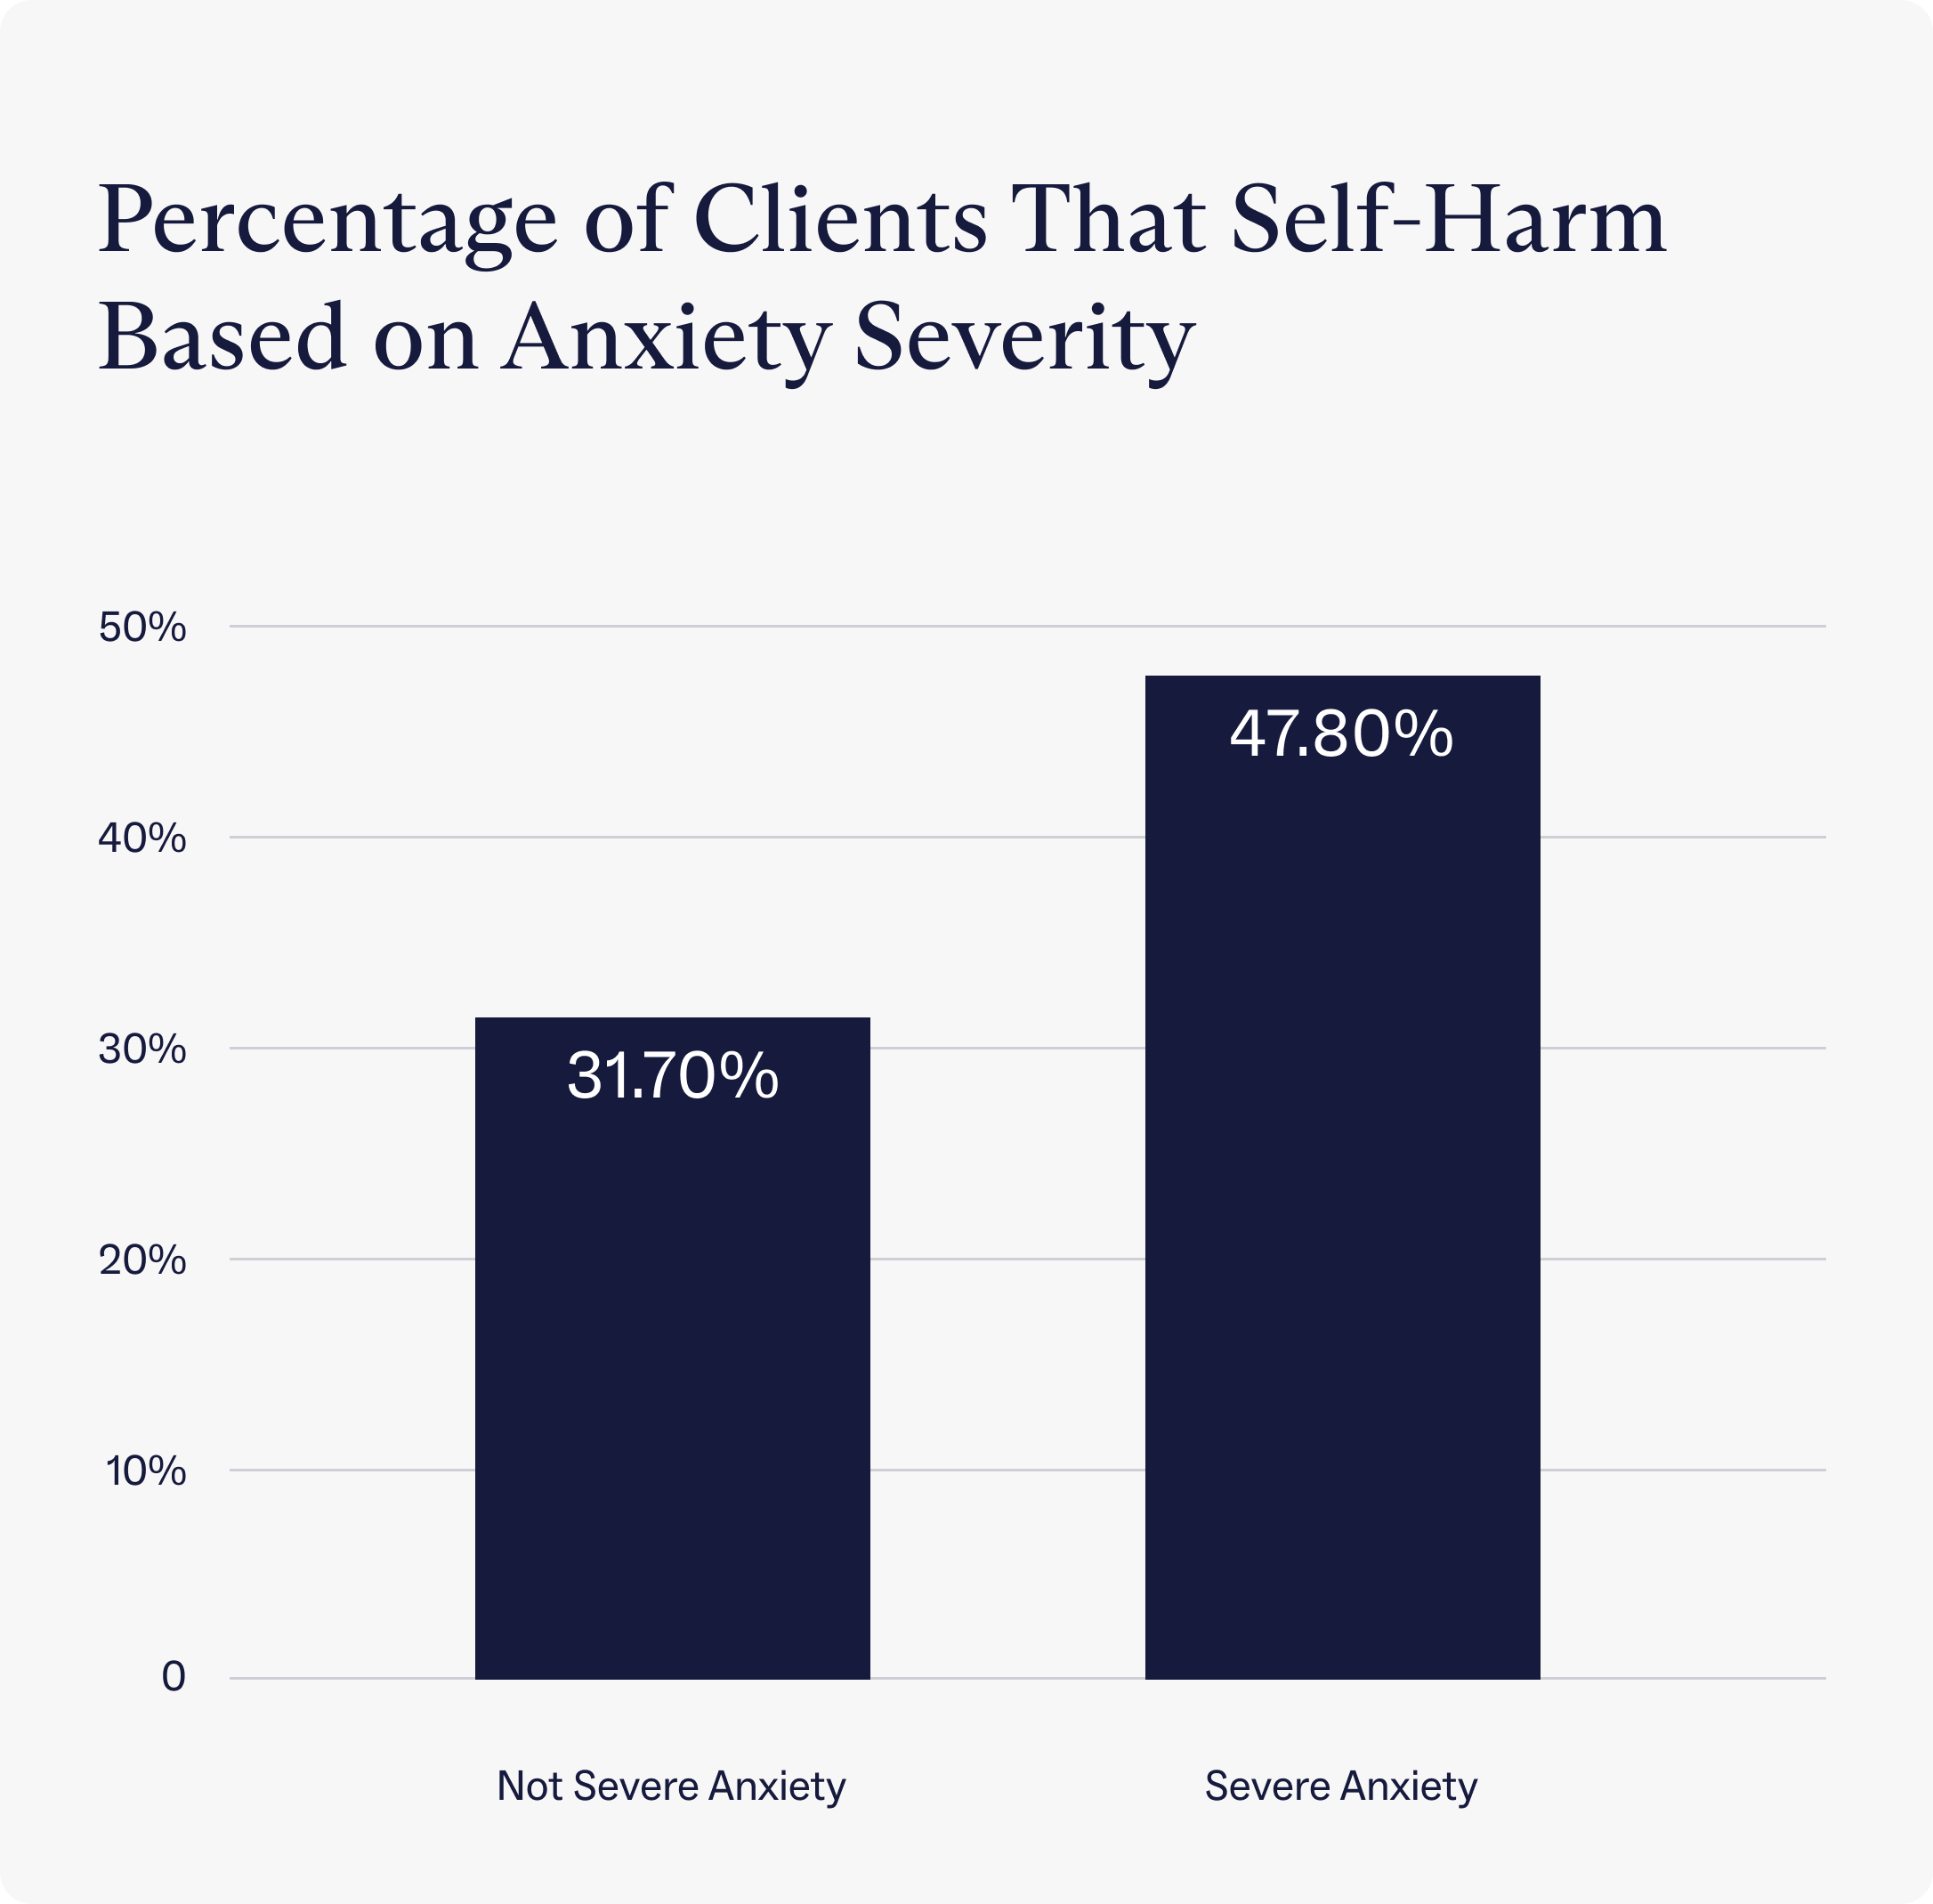 Percentage of Charlie Health clients that self-harm based on anxiety severity